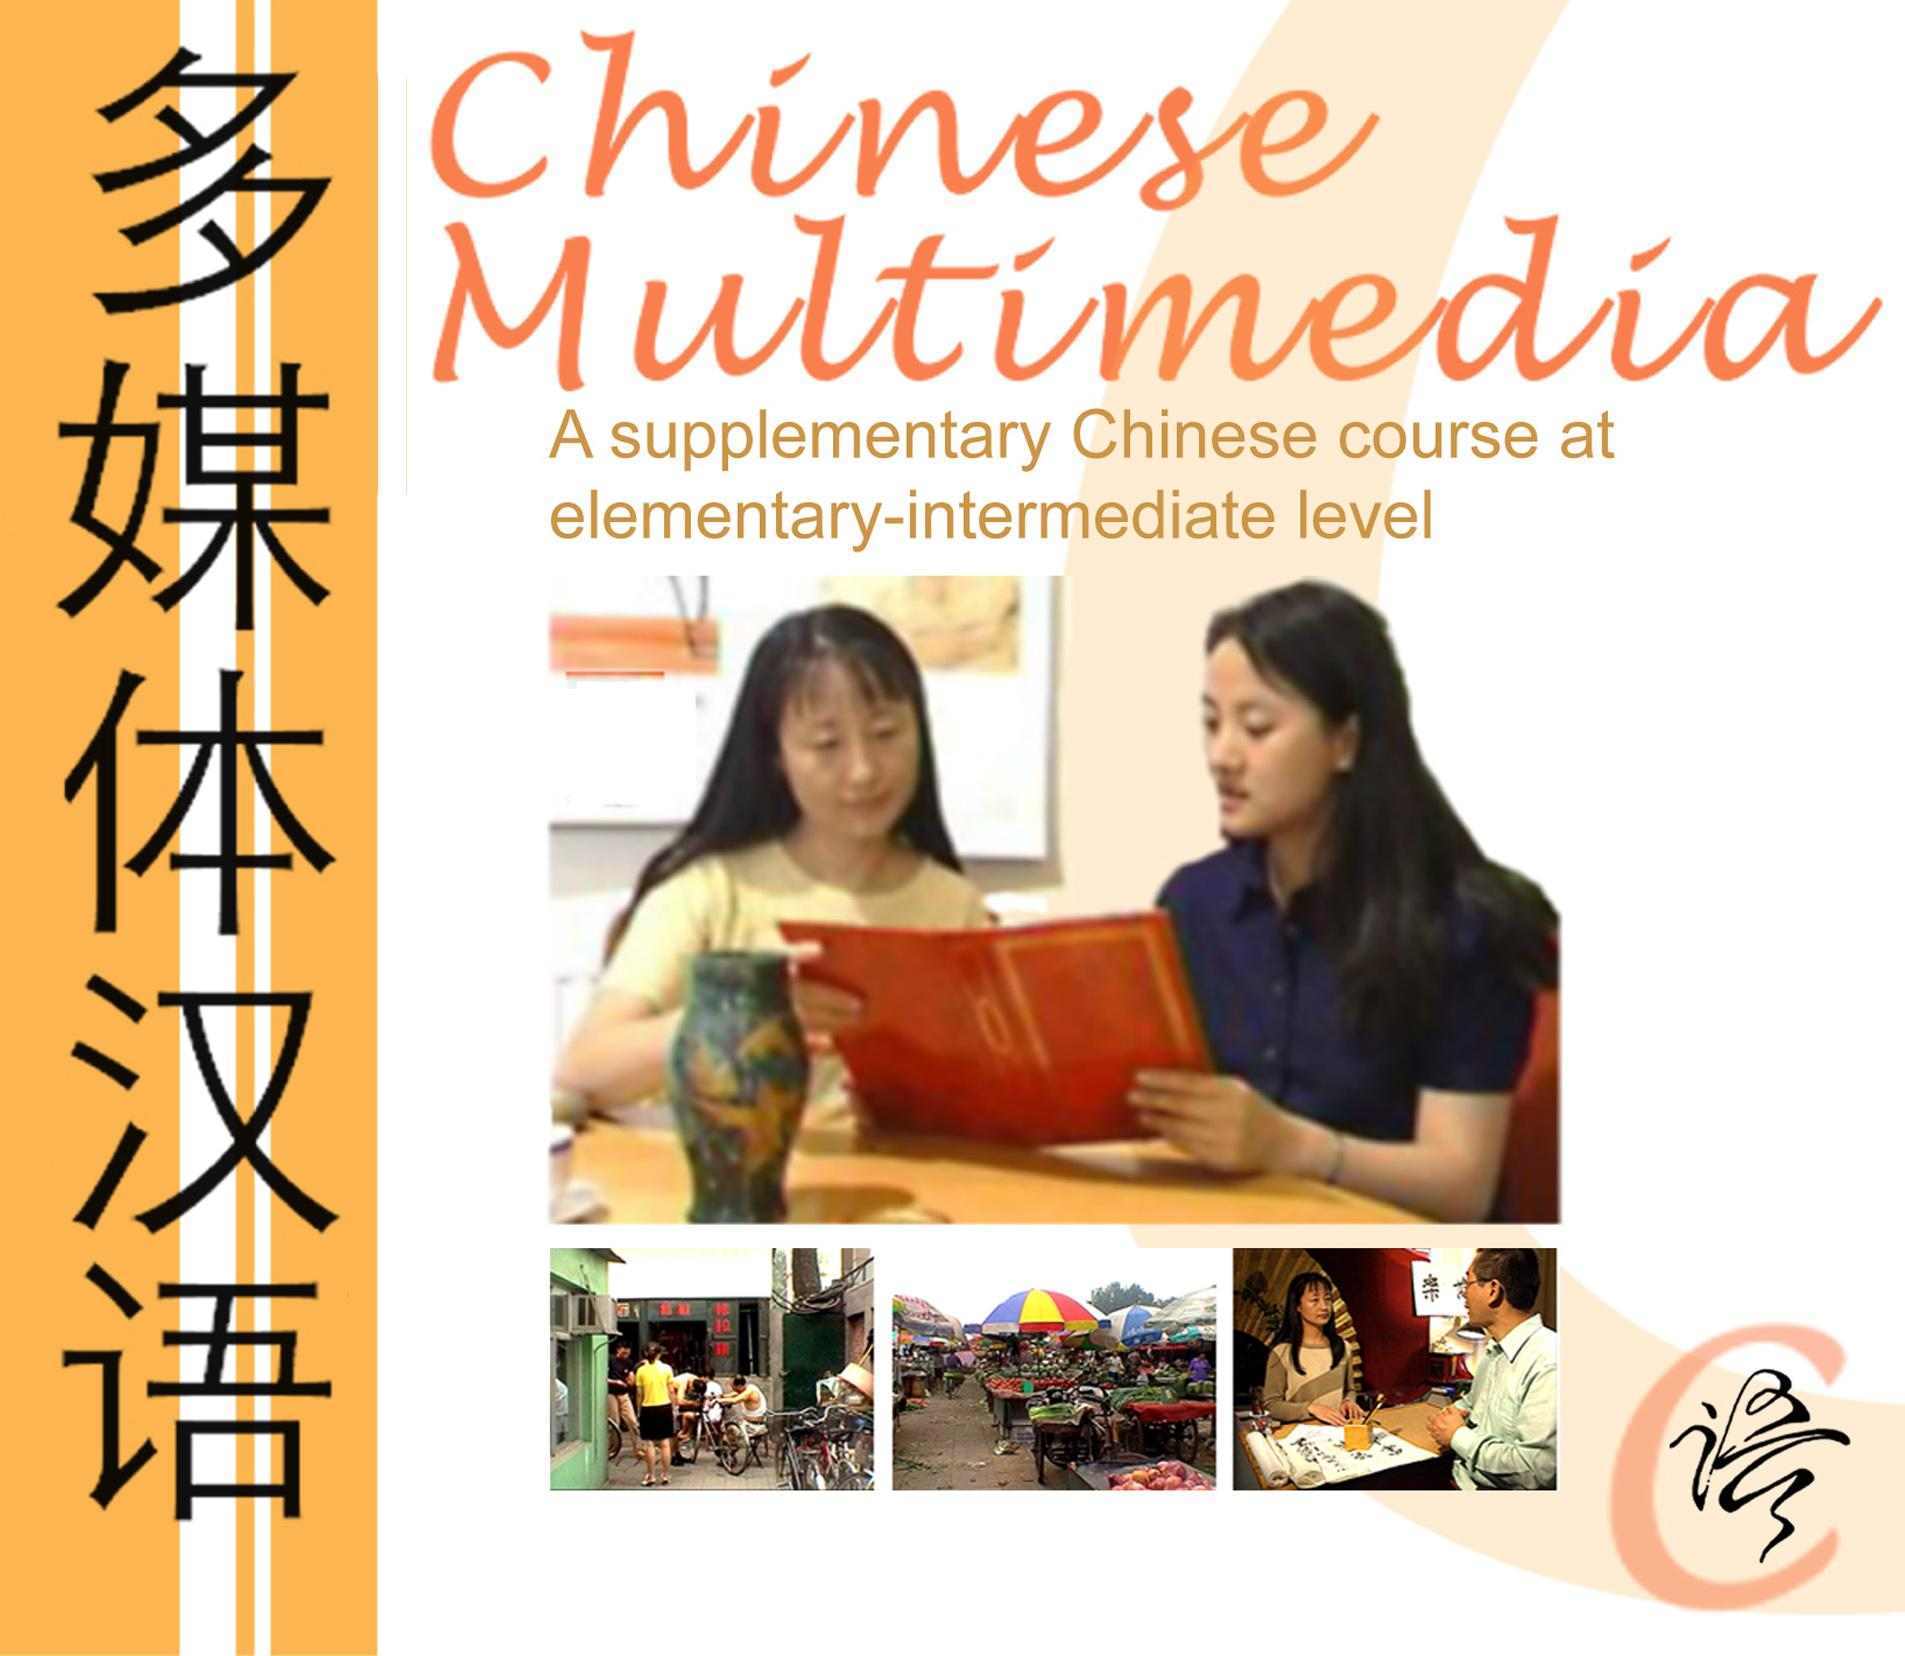 CTCFL CD cover for Elementary-Intermediate Chinese course with video screenshots showing various scenes such as ordering a meal and getting a bike repaired